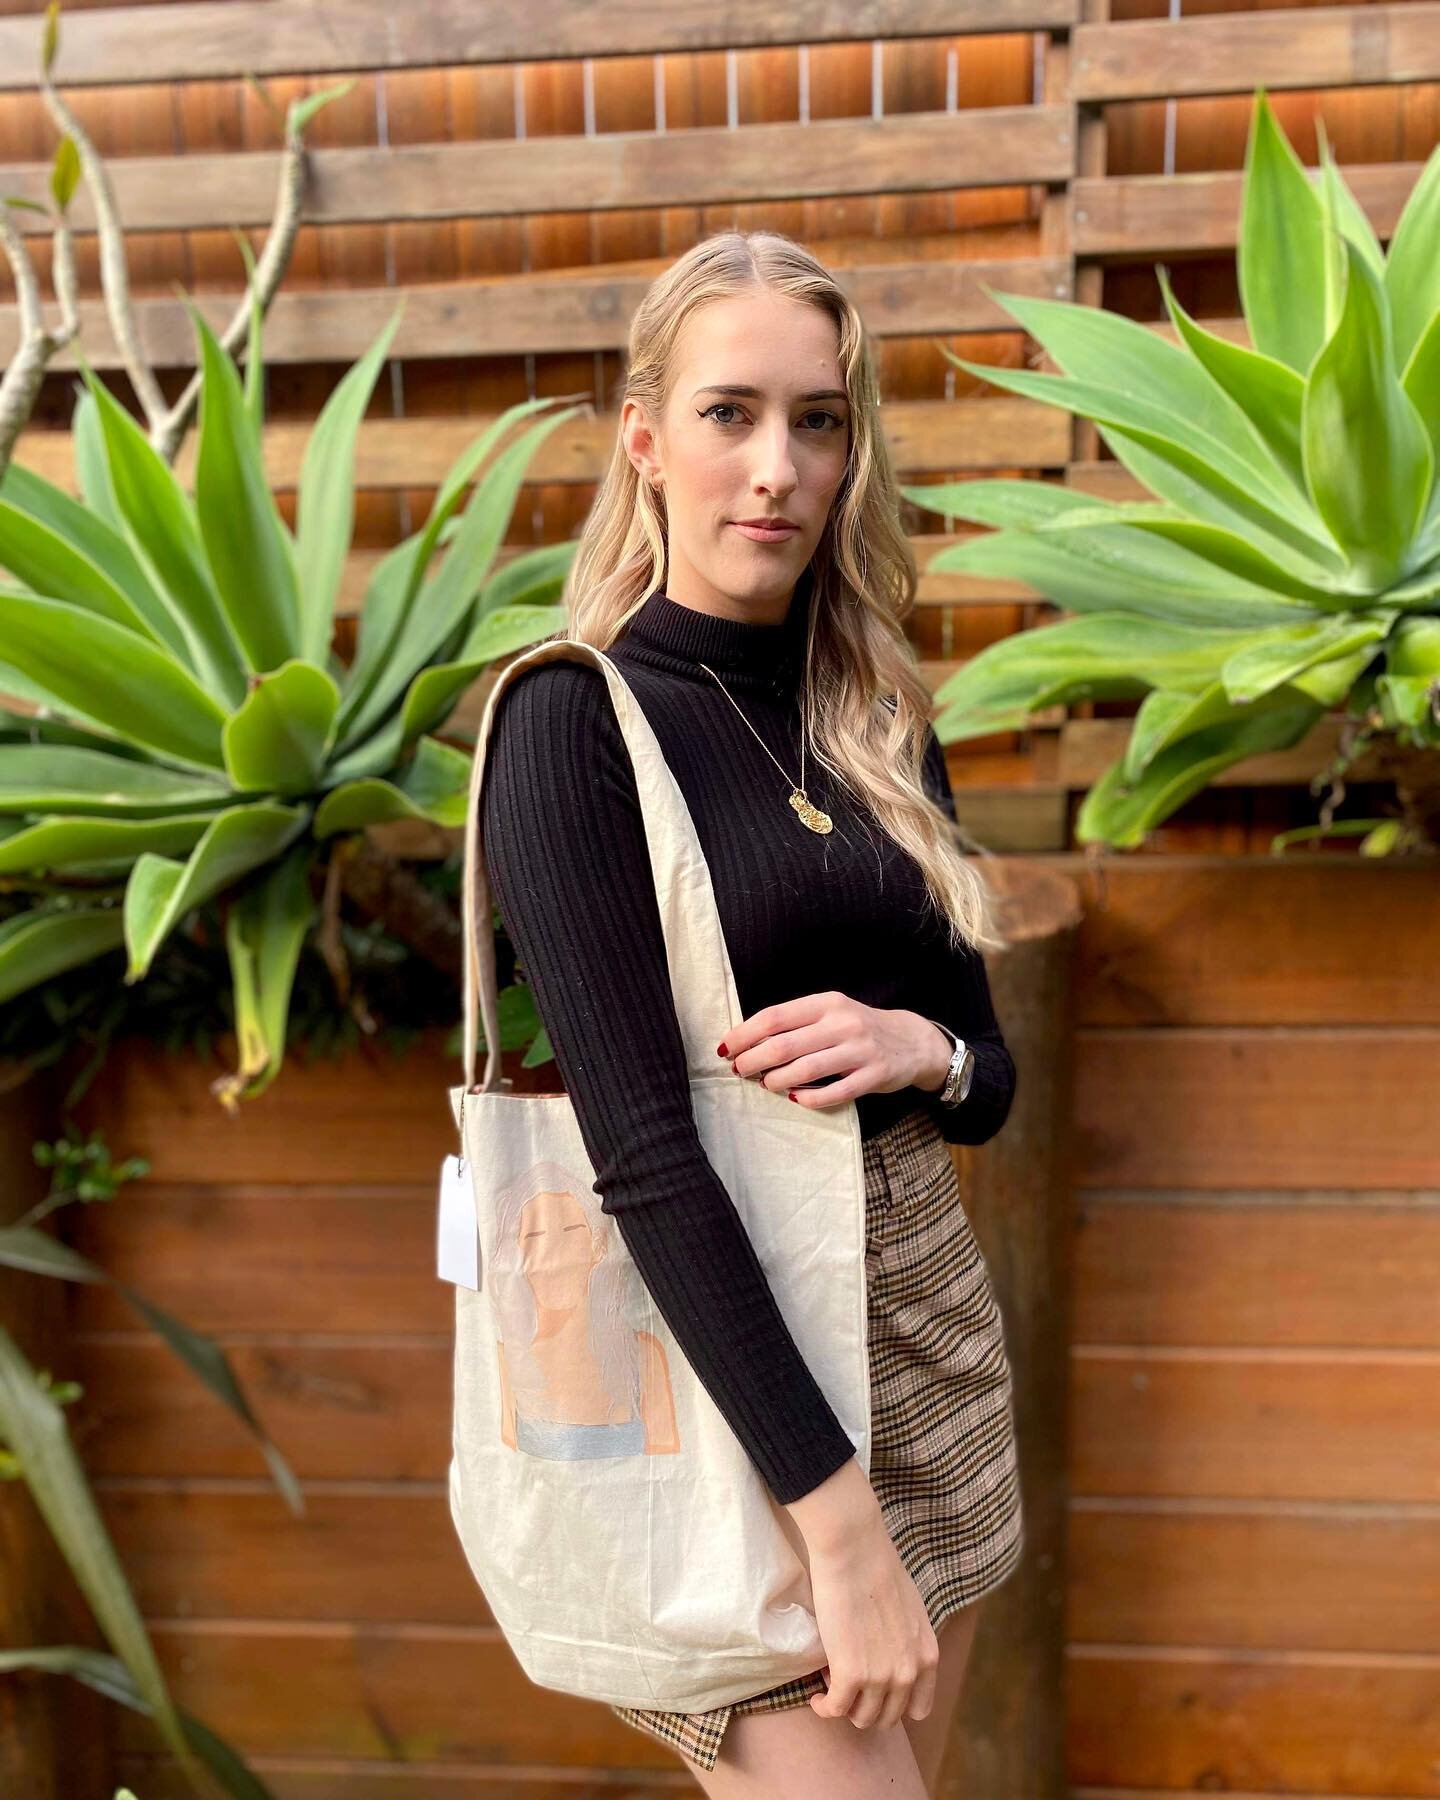 &ldquo;You don't have to carry a designer bag that costs more than a car to look cool.&rdquo; 
 -Kesha 
.
.
.
.
#totebag #totebags #tote #totebagstyle #painted #paint #power #handmade #handpainted #cutebag #smallbiz #smallbusiness #madetoorder #fashi